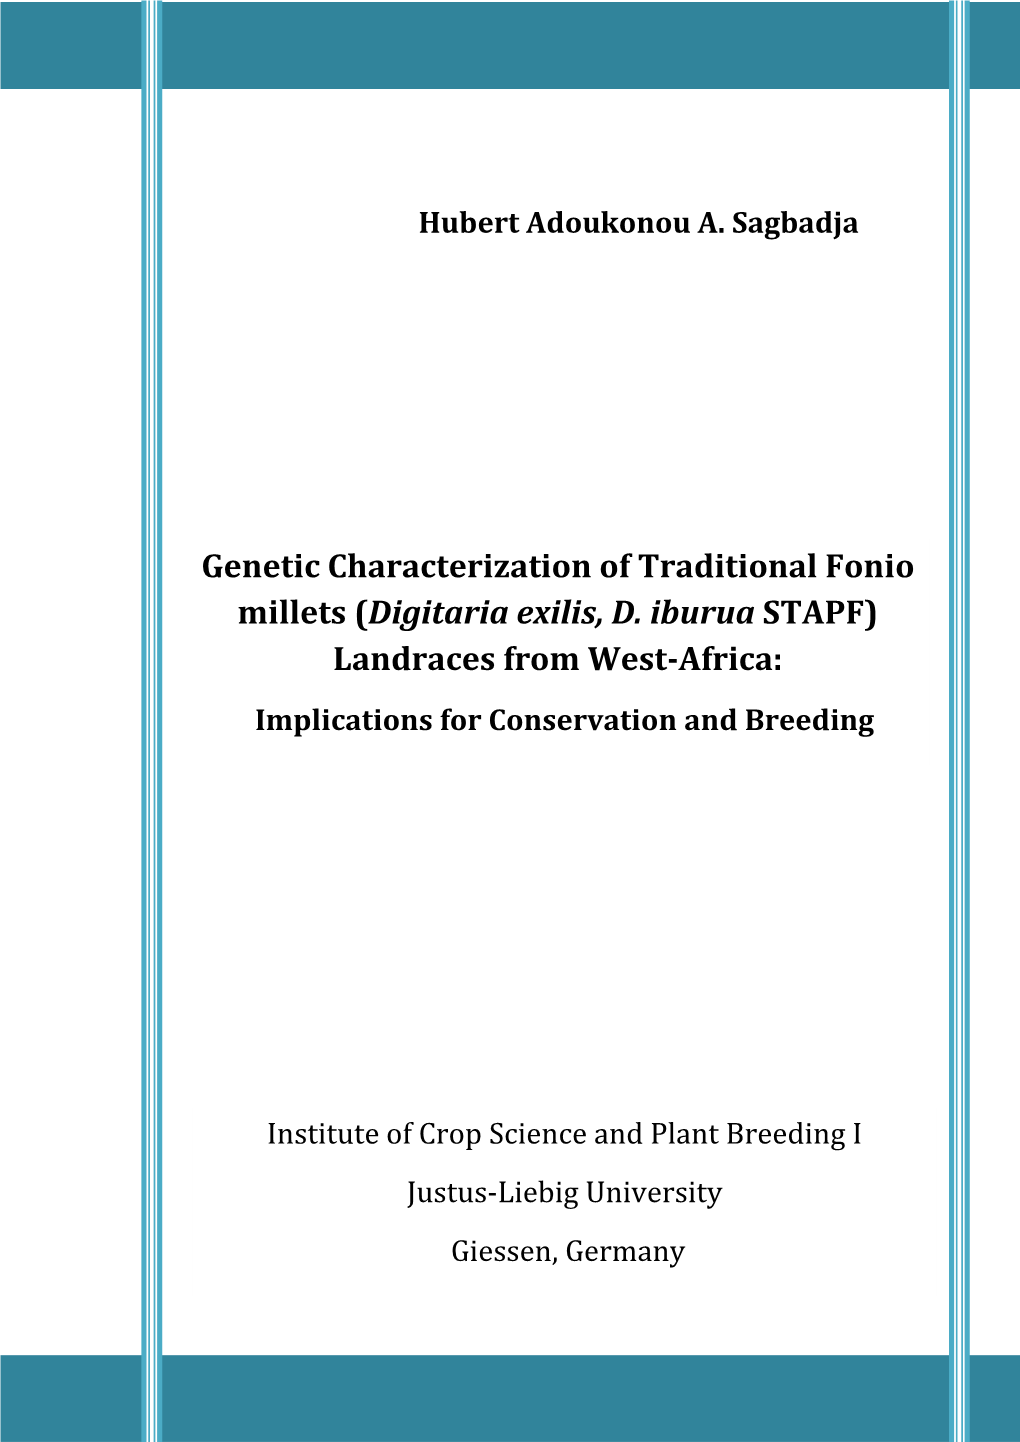 Genetic Characterization of Traditional Fonio Millets (Digitaria Exilis, D